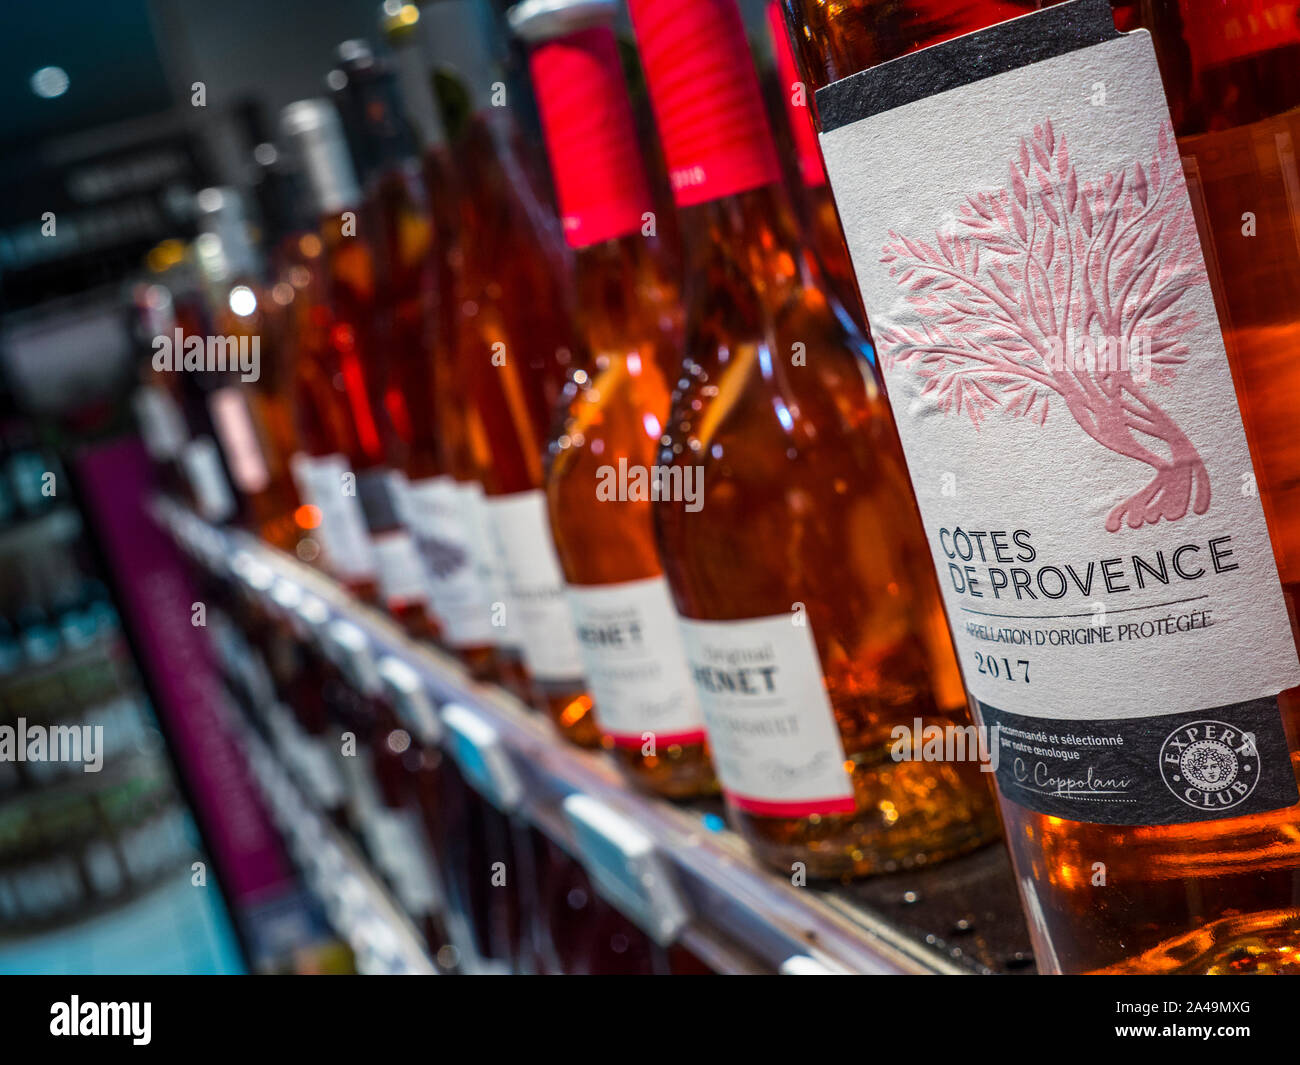 Côtes de Provence Rosé wine bottle label featured in foreground, with other rosé wine bottles behind on French wine shop store shelf display for sale Stock Photo